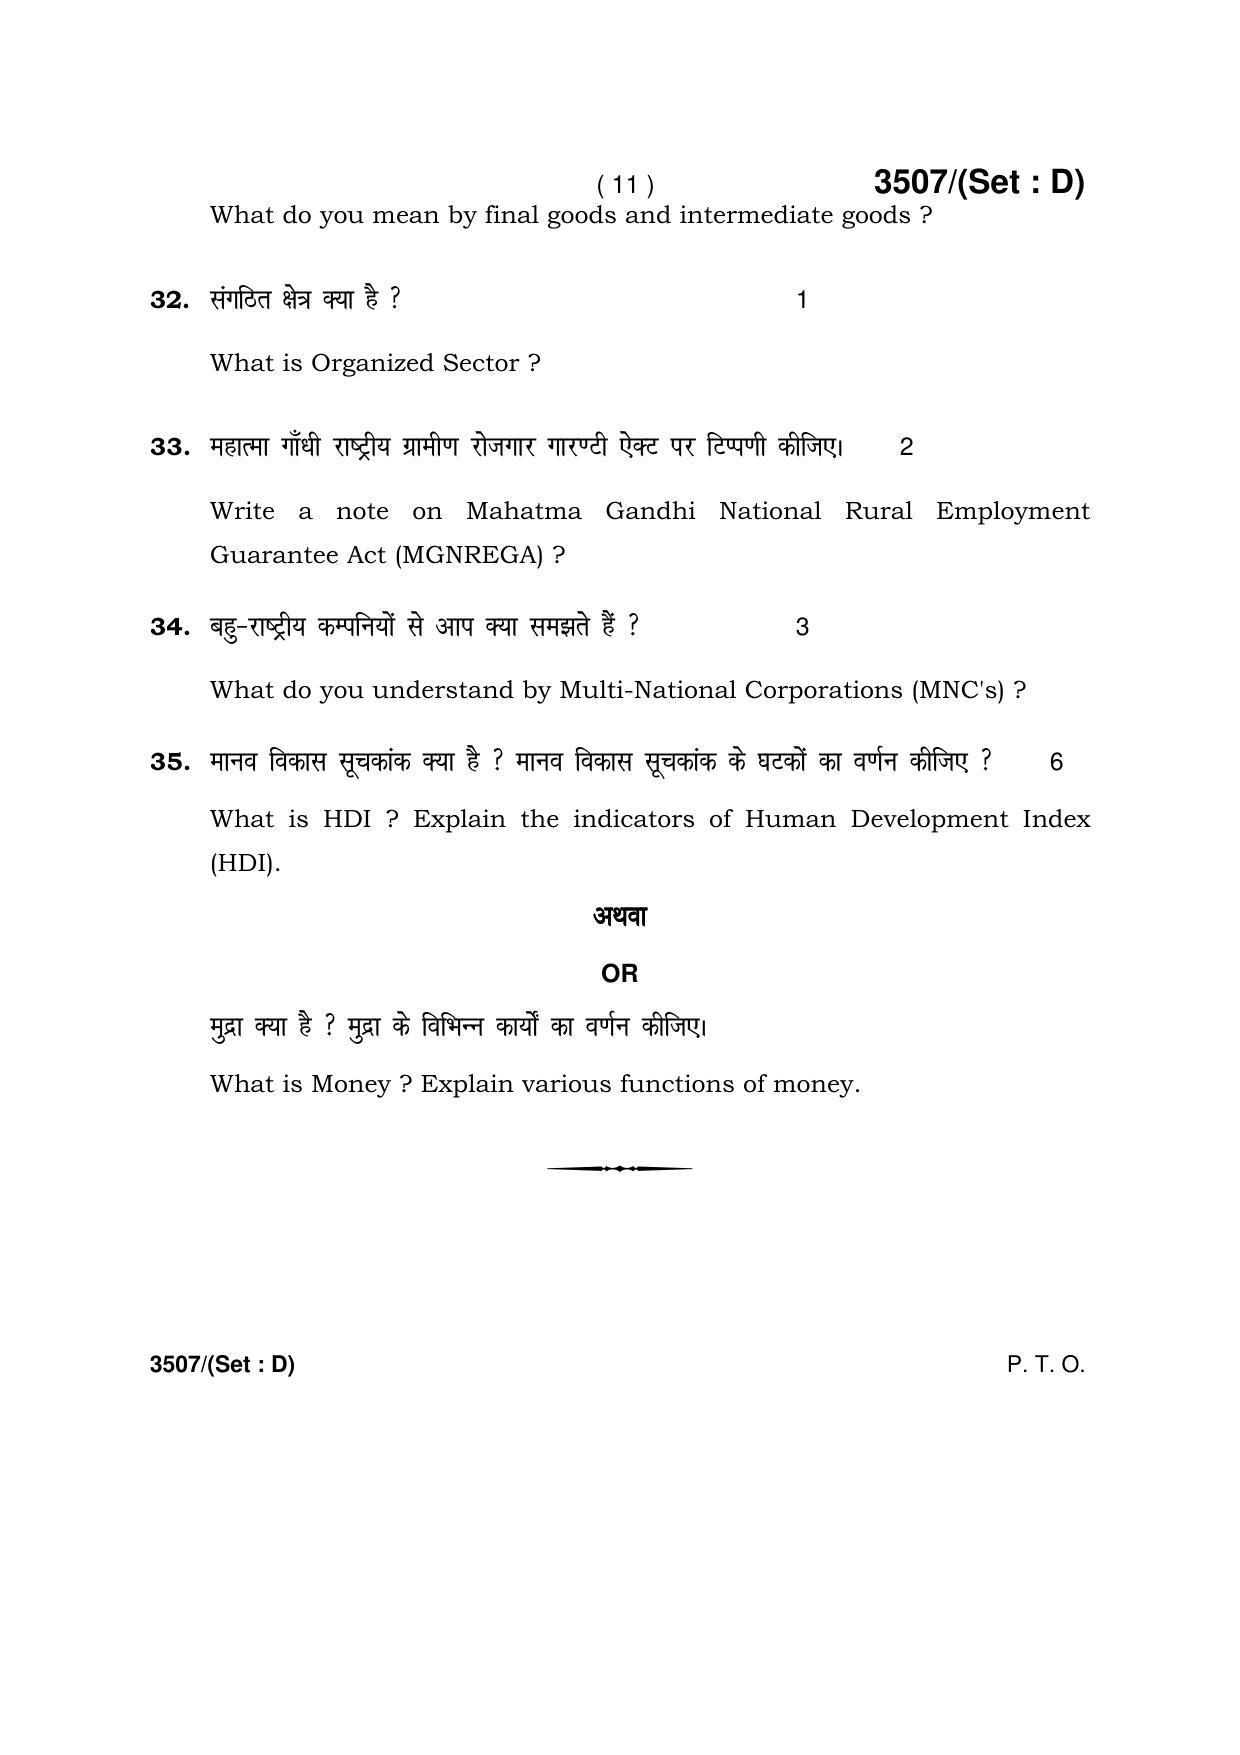 Haryana Board HBSE Class 10 Social Science -D 2018 Question Paper - Page 11